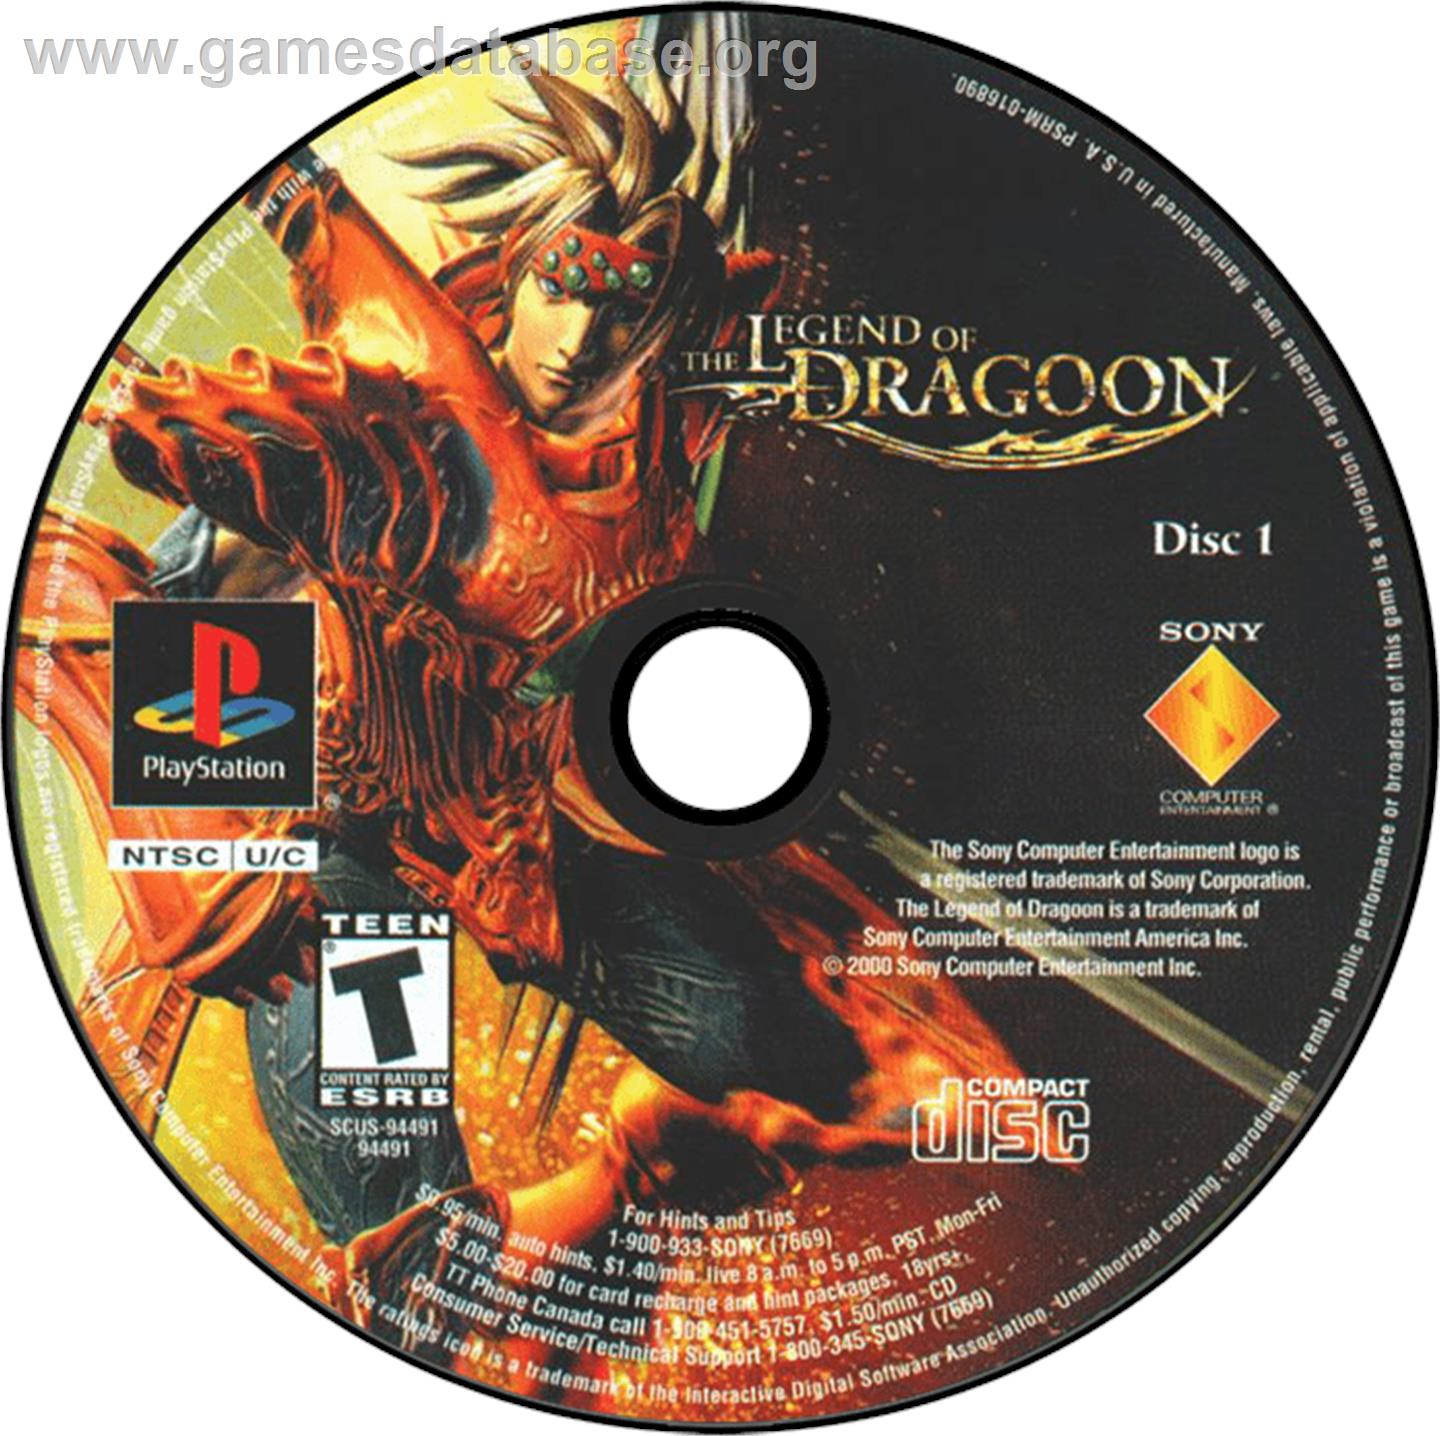 The Legend of Dragoon - Sony Playstation - Artwork - Disc